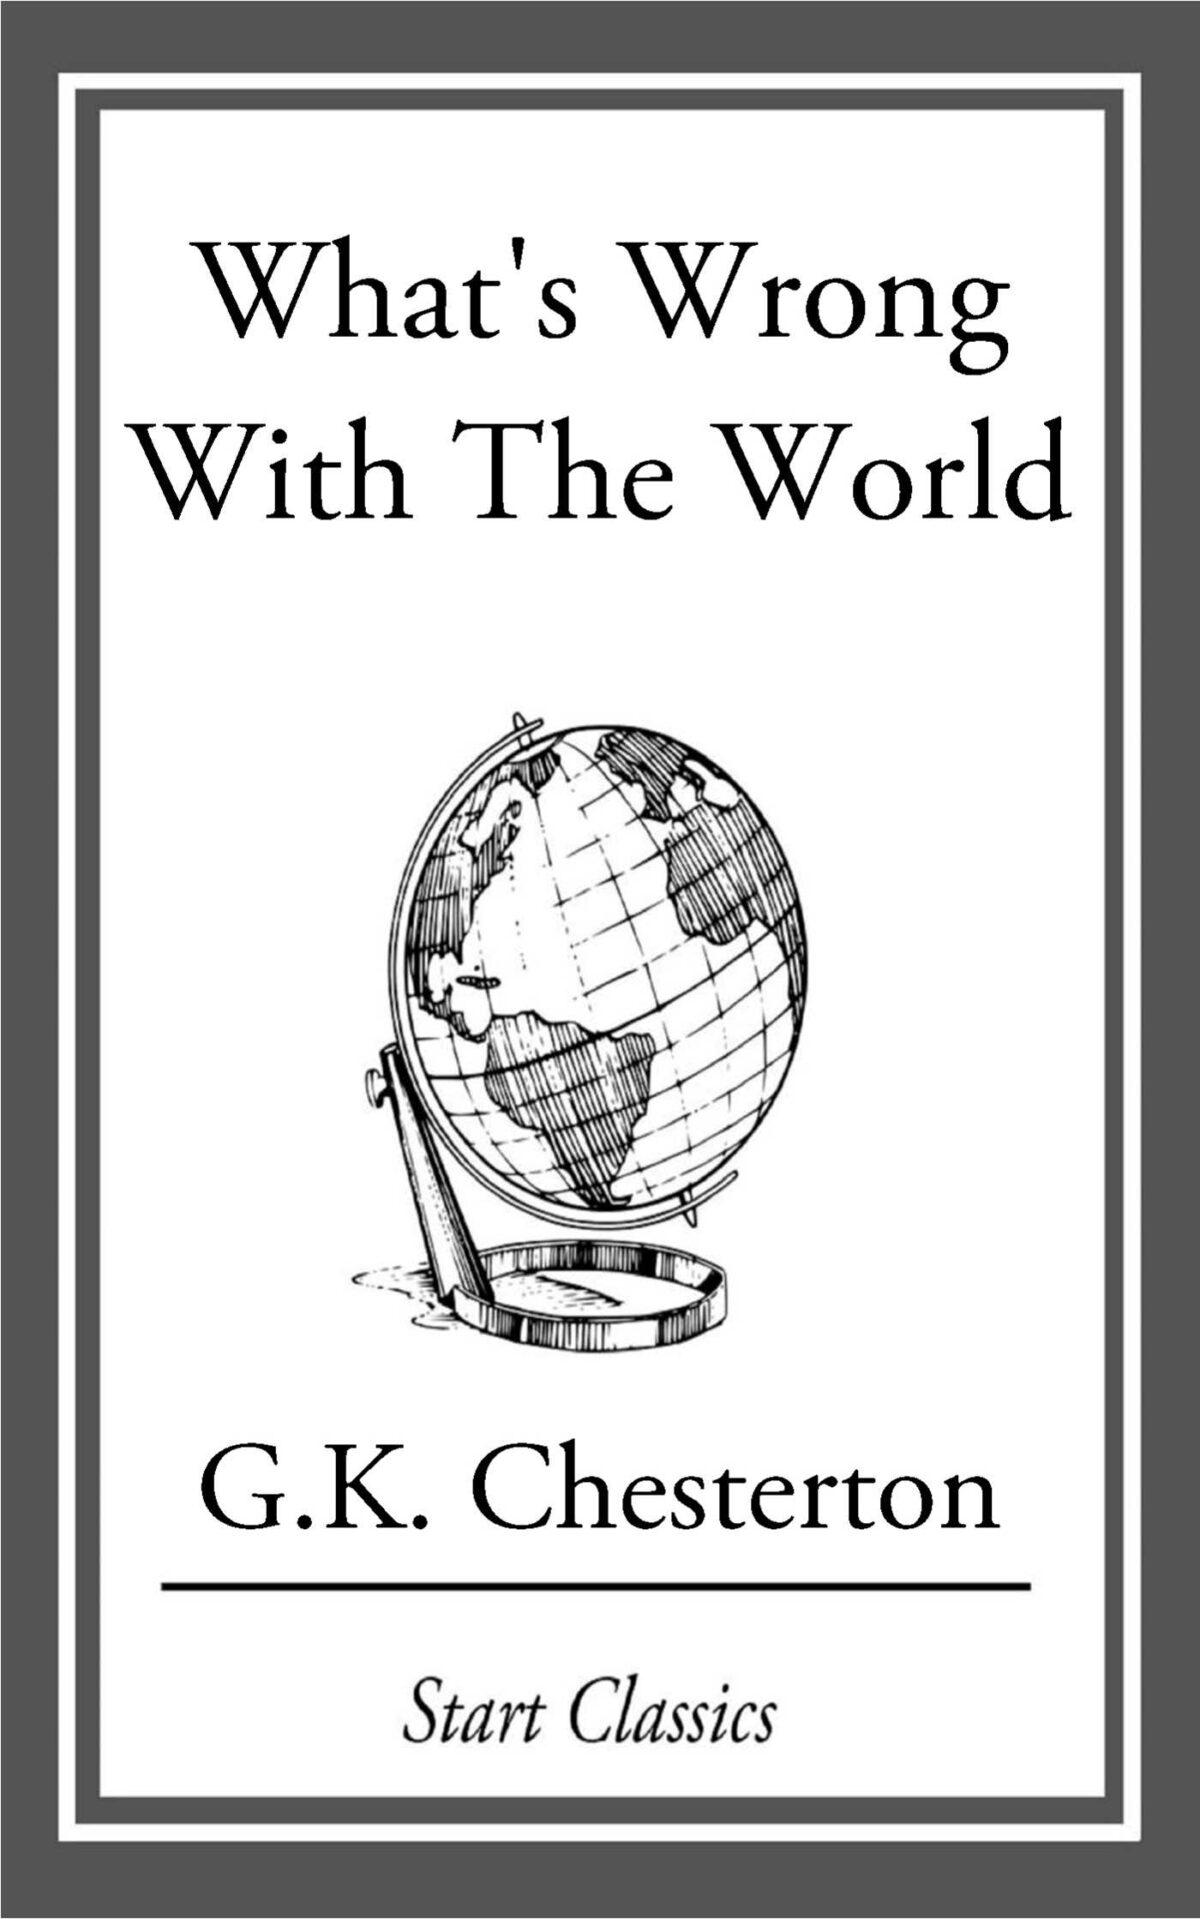 G.K. Chesterton's "What's Wrong With the World."